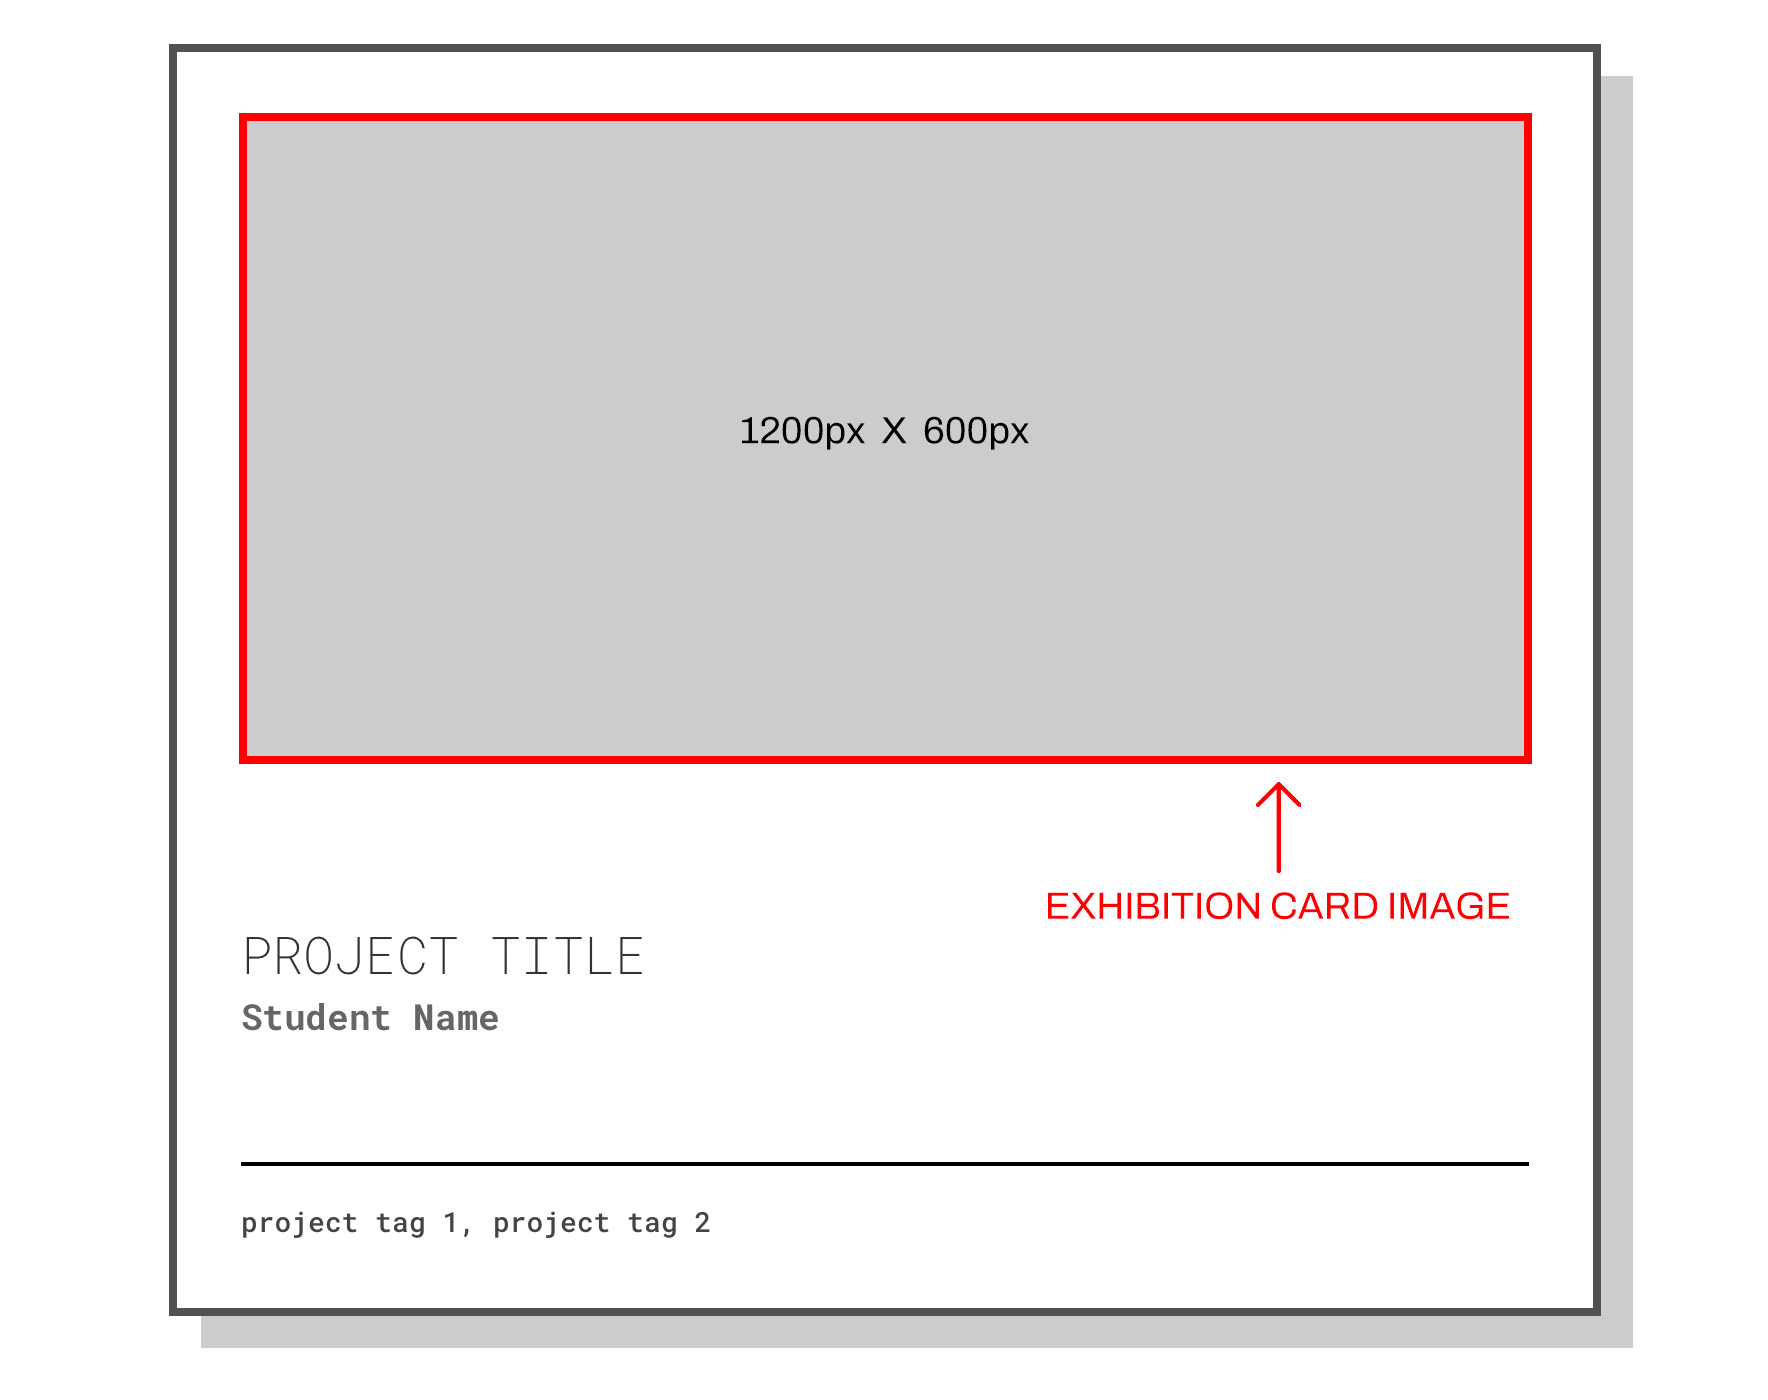 exhibition card example image